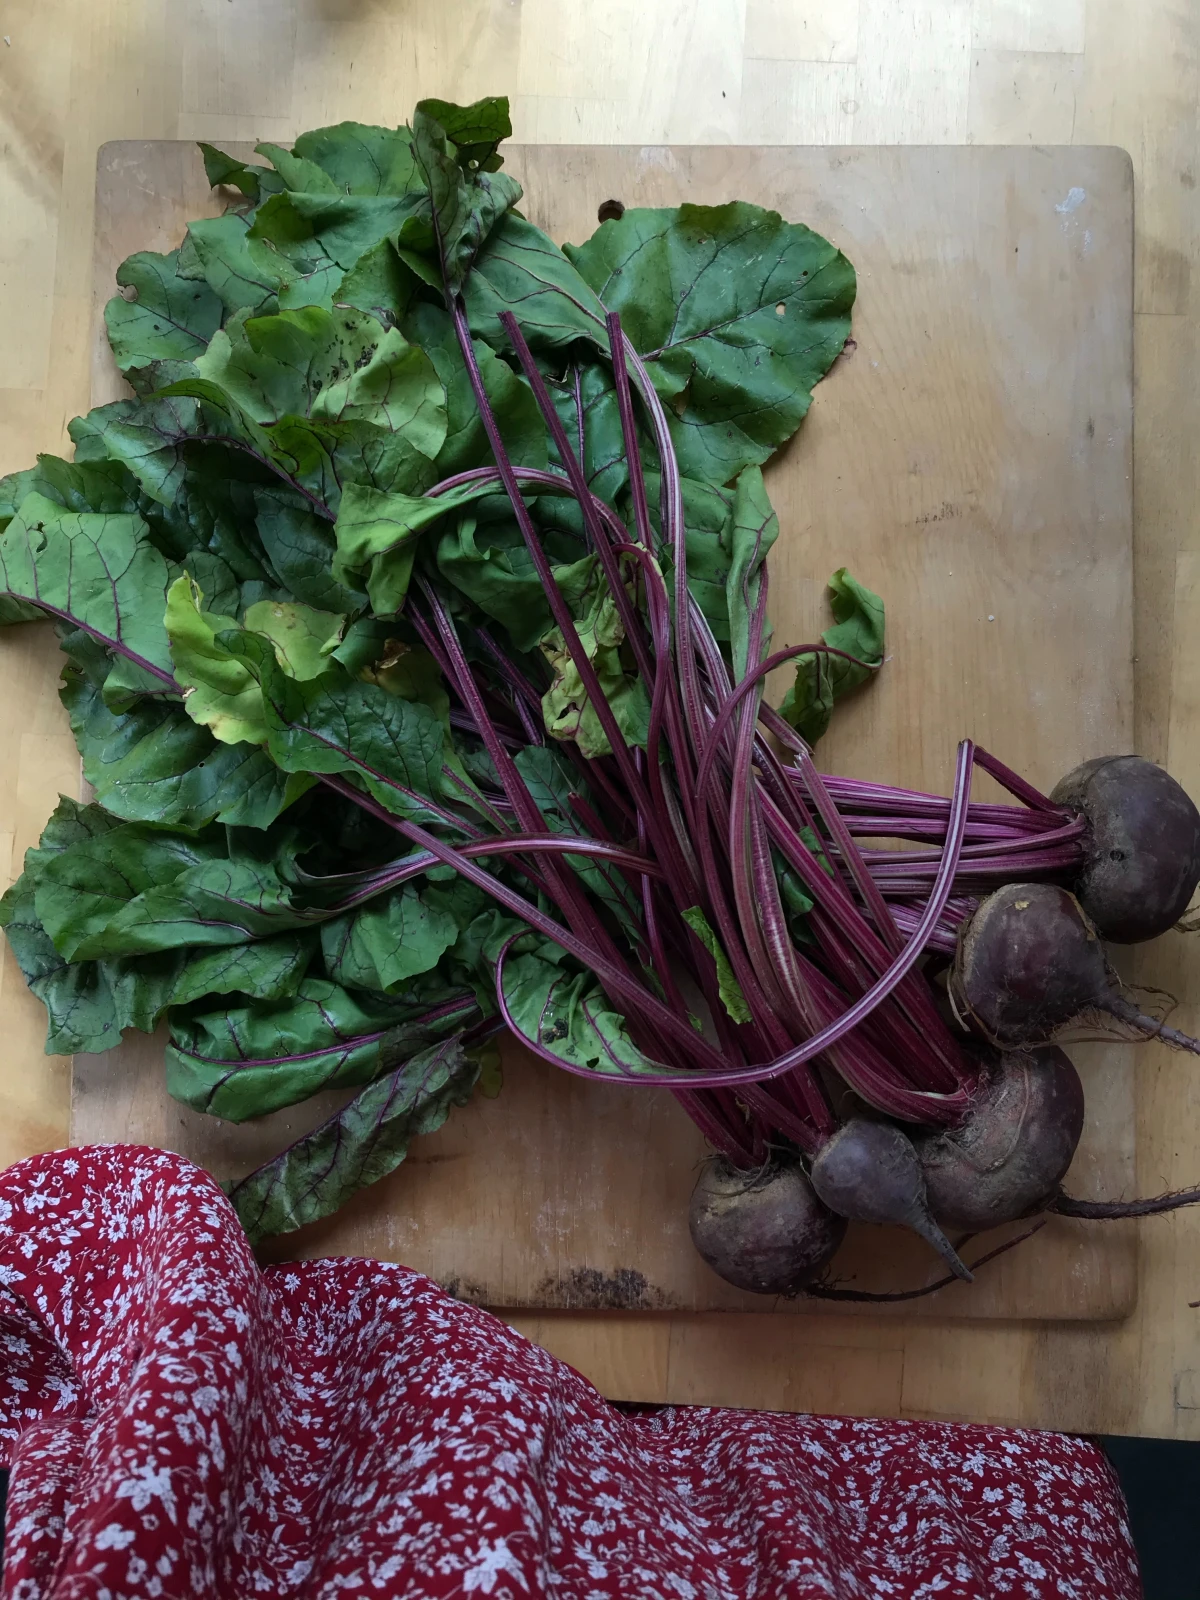 red beets with leaves